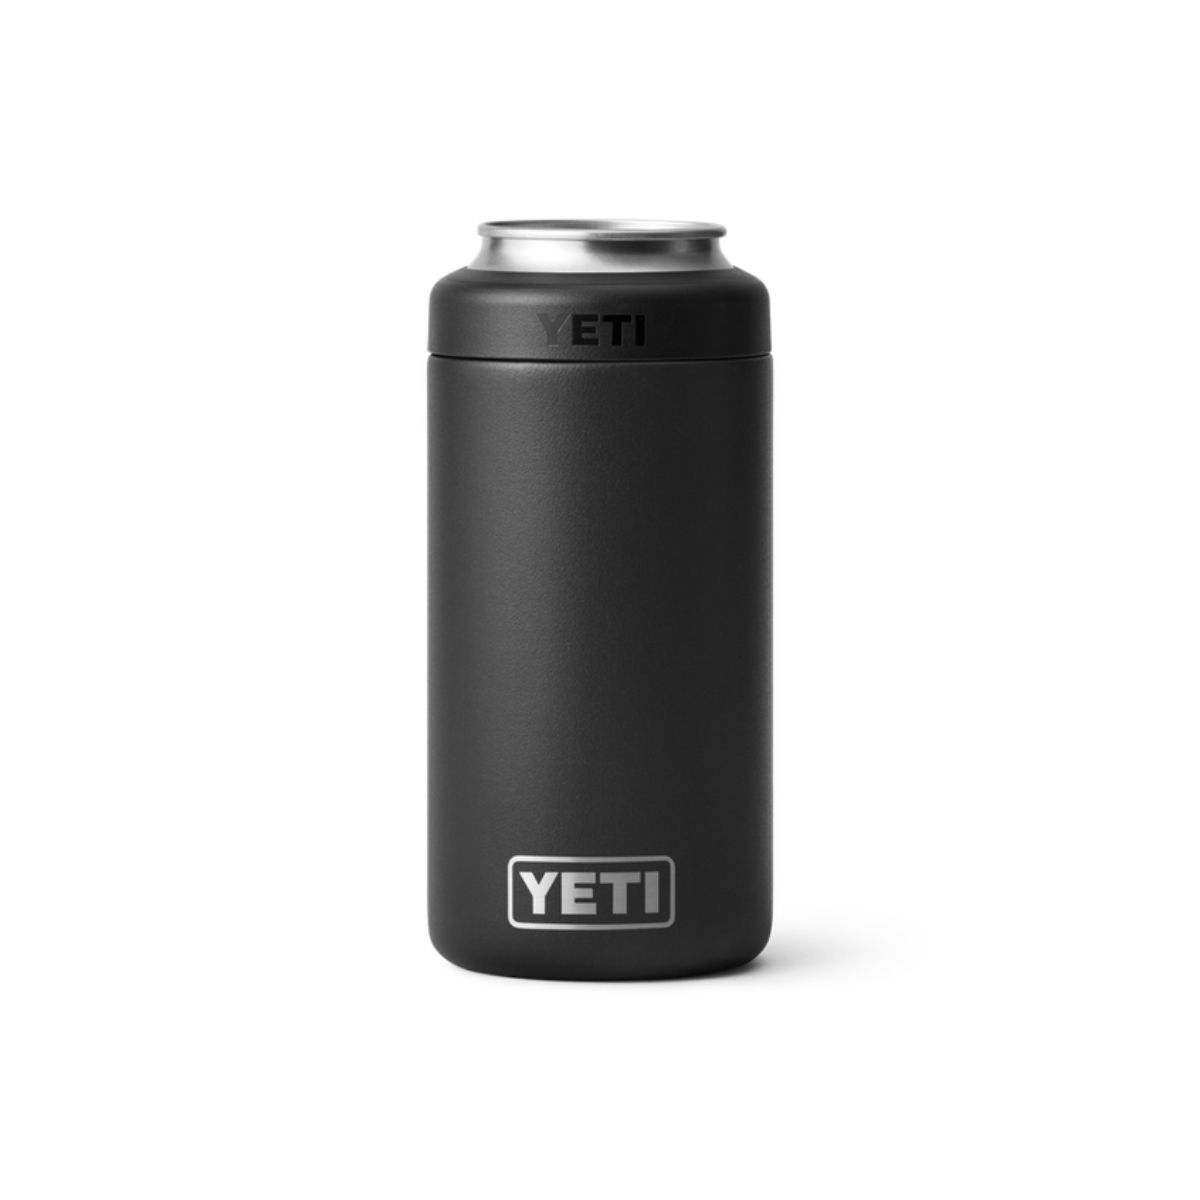 CamelBak 16oz Vacuum Insulated Stainless Steel Tall Can Cooler - Black